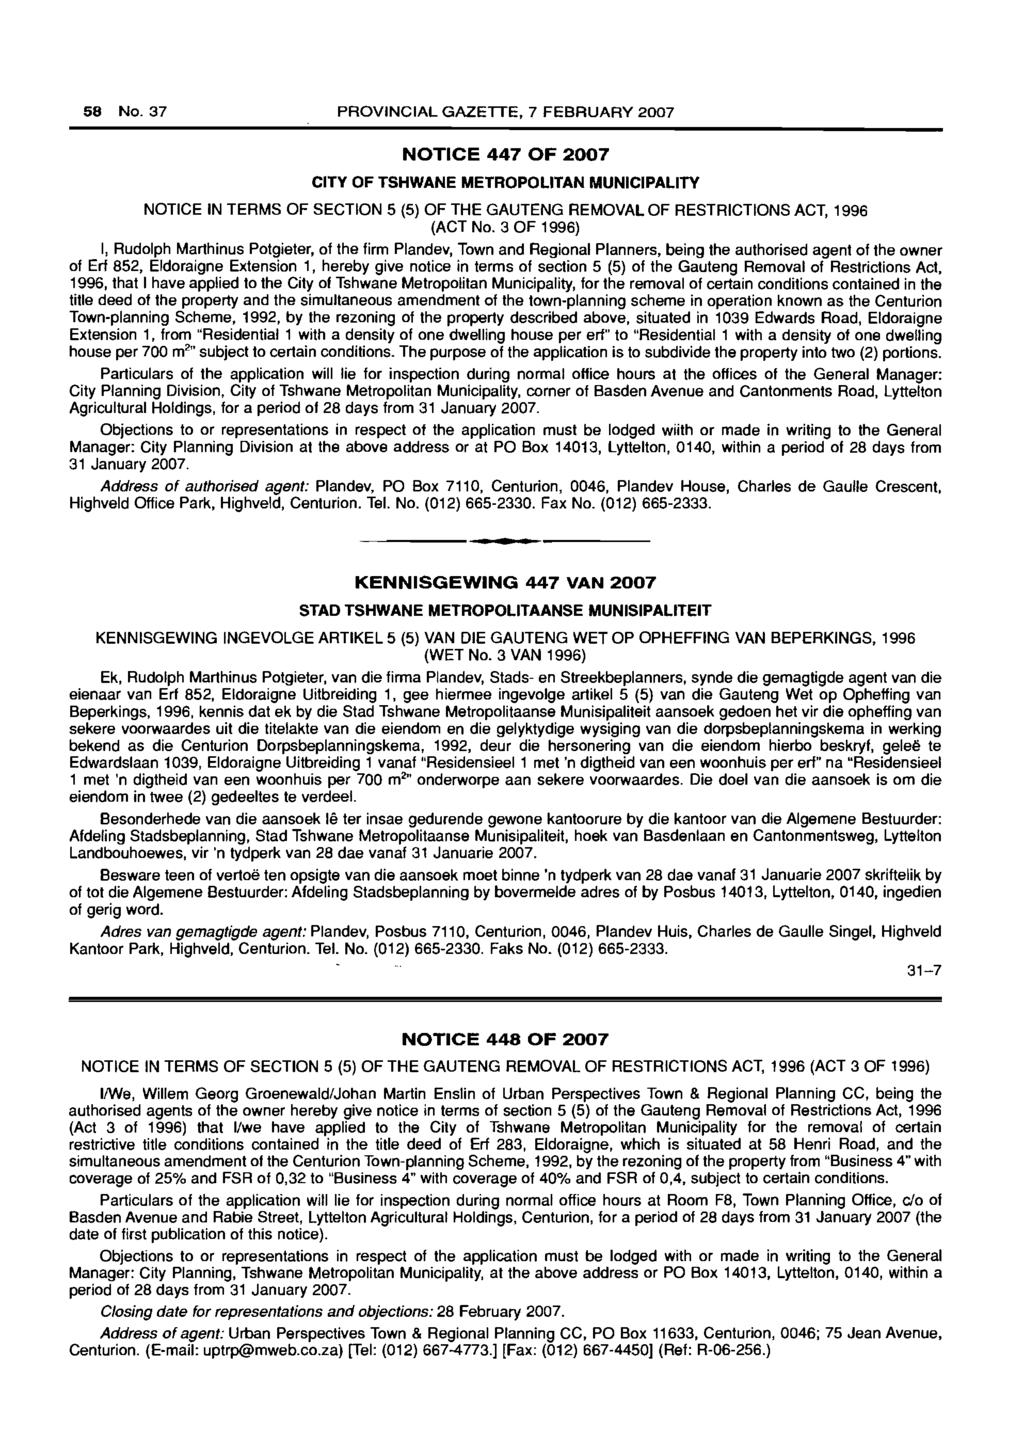 58 No. 37 PROVINCIAL GAZETTE, 7 FEBRUARY 2007 NOTICE 447 OF 2007 CITY OF TSHWANE METROPOLITAN MUNICIPALITY NOTICE IN TERMS OF SECTION 5 (5) OF THE GAUTENG REMOVAL OF RESTRICTIONS ACT, 1996 (ACT No.